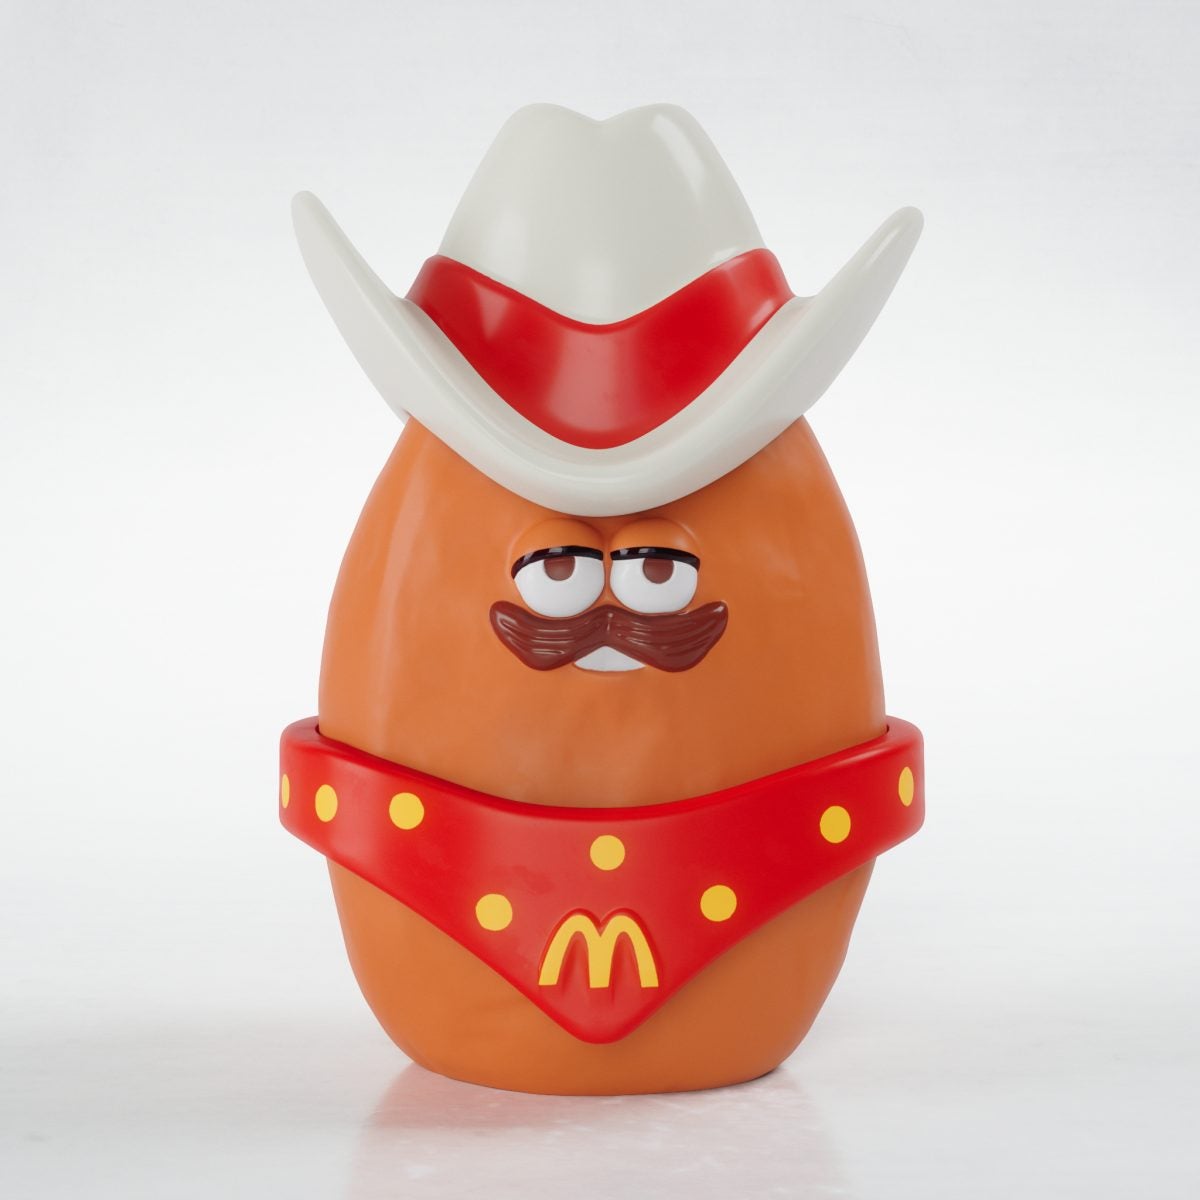 Iconic McDonald's Happy Meal Toys From Our Childhood Available From Nov 28 & We're Feeling Nostalgic - WORLD OF BUZZ 3